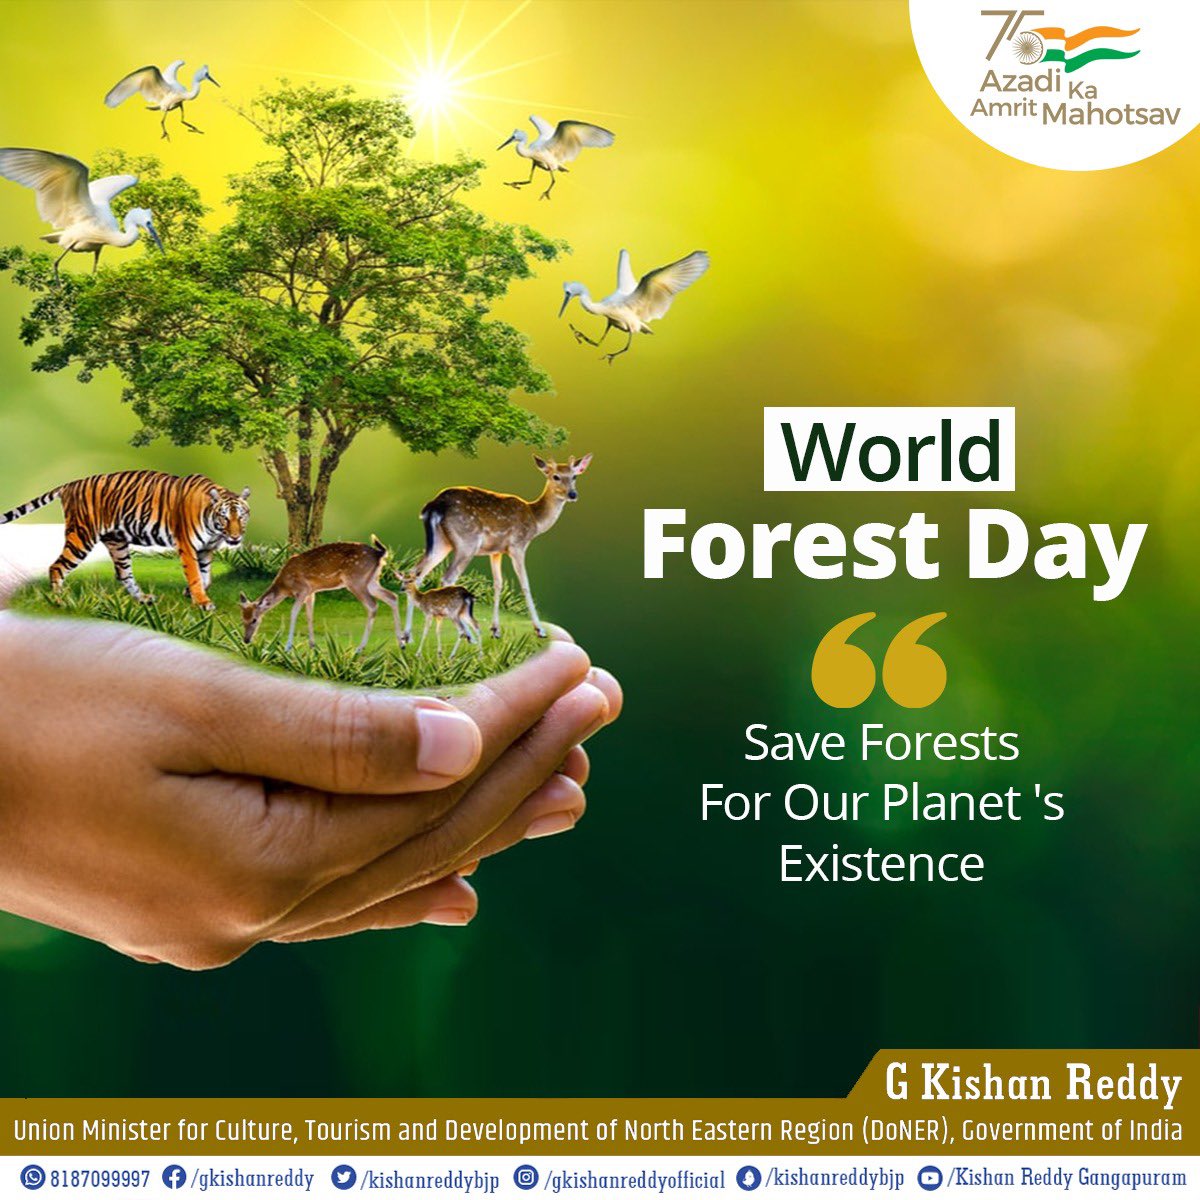 'FORESTS ARE OUR LIFELINE'!

Restoring forests & Sustainability is the key to combat climate change for the well-being of current & future generations.

Today on #WorldForestDay let's unite our efforts towards restoring our ecosystem through #forestrestoration.
#GoGreen🌳🟢